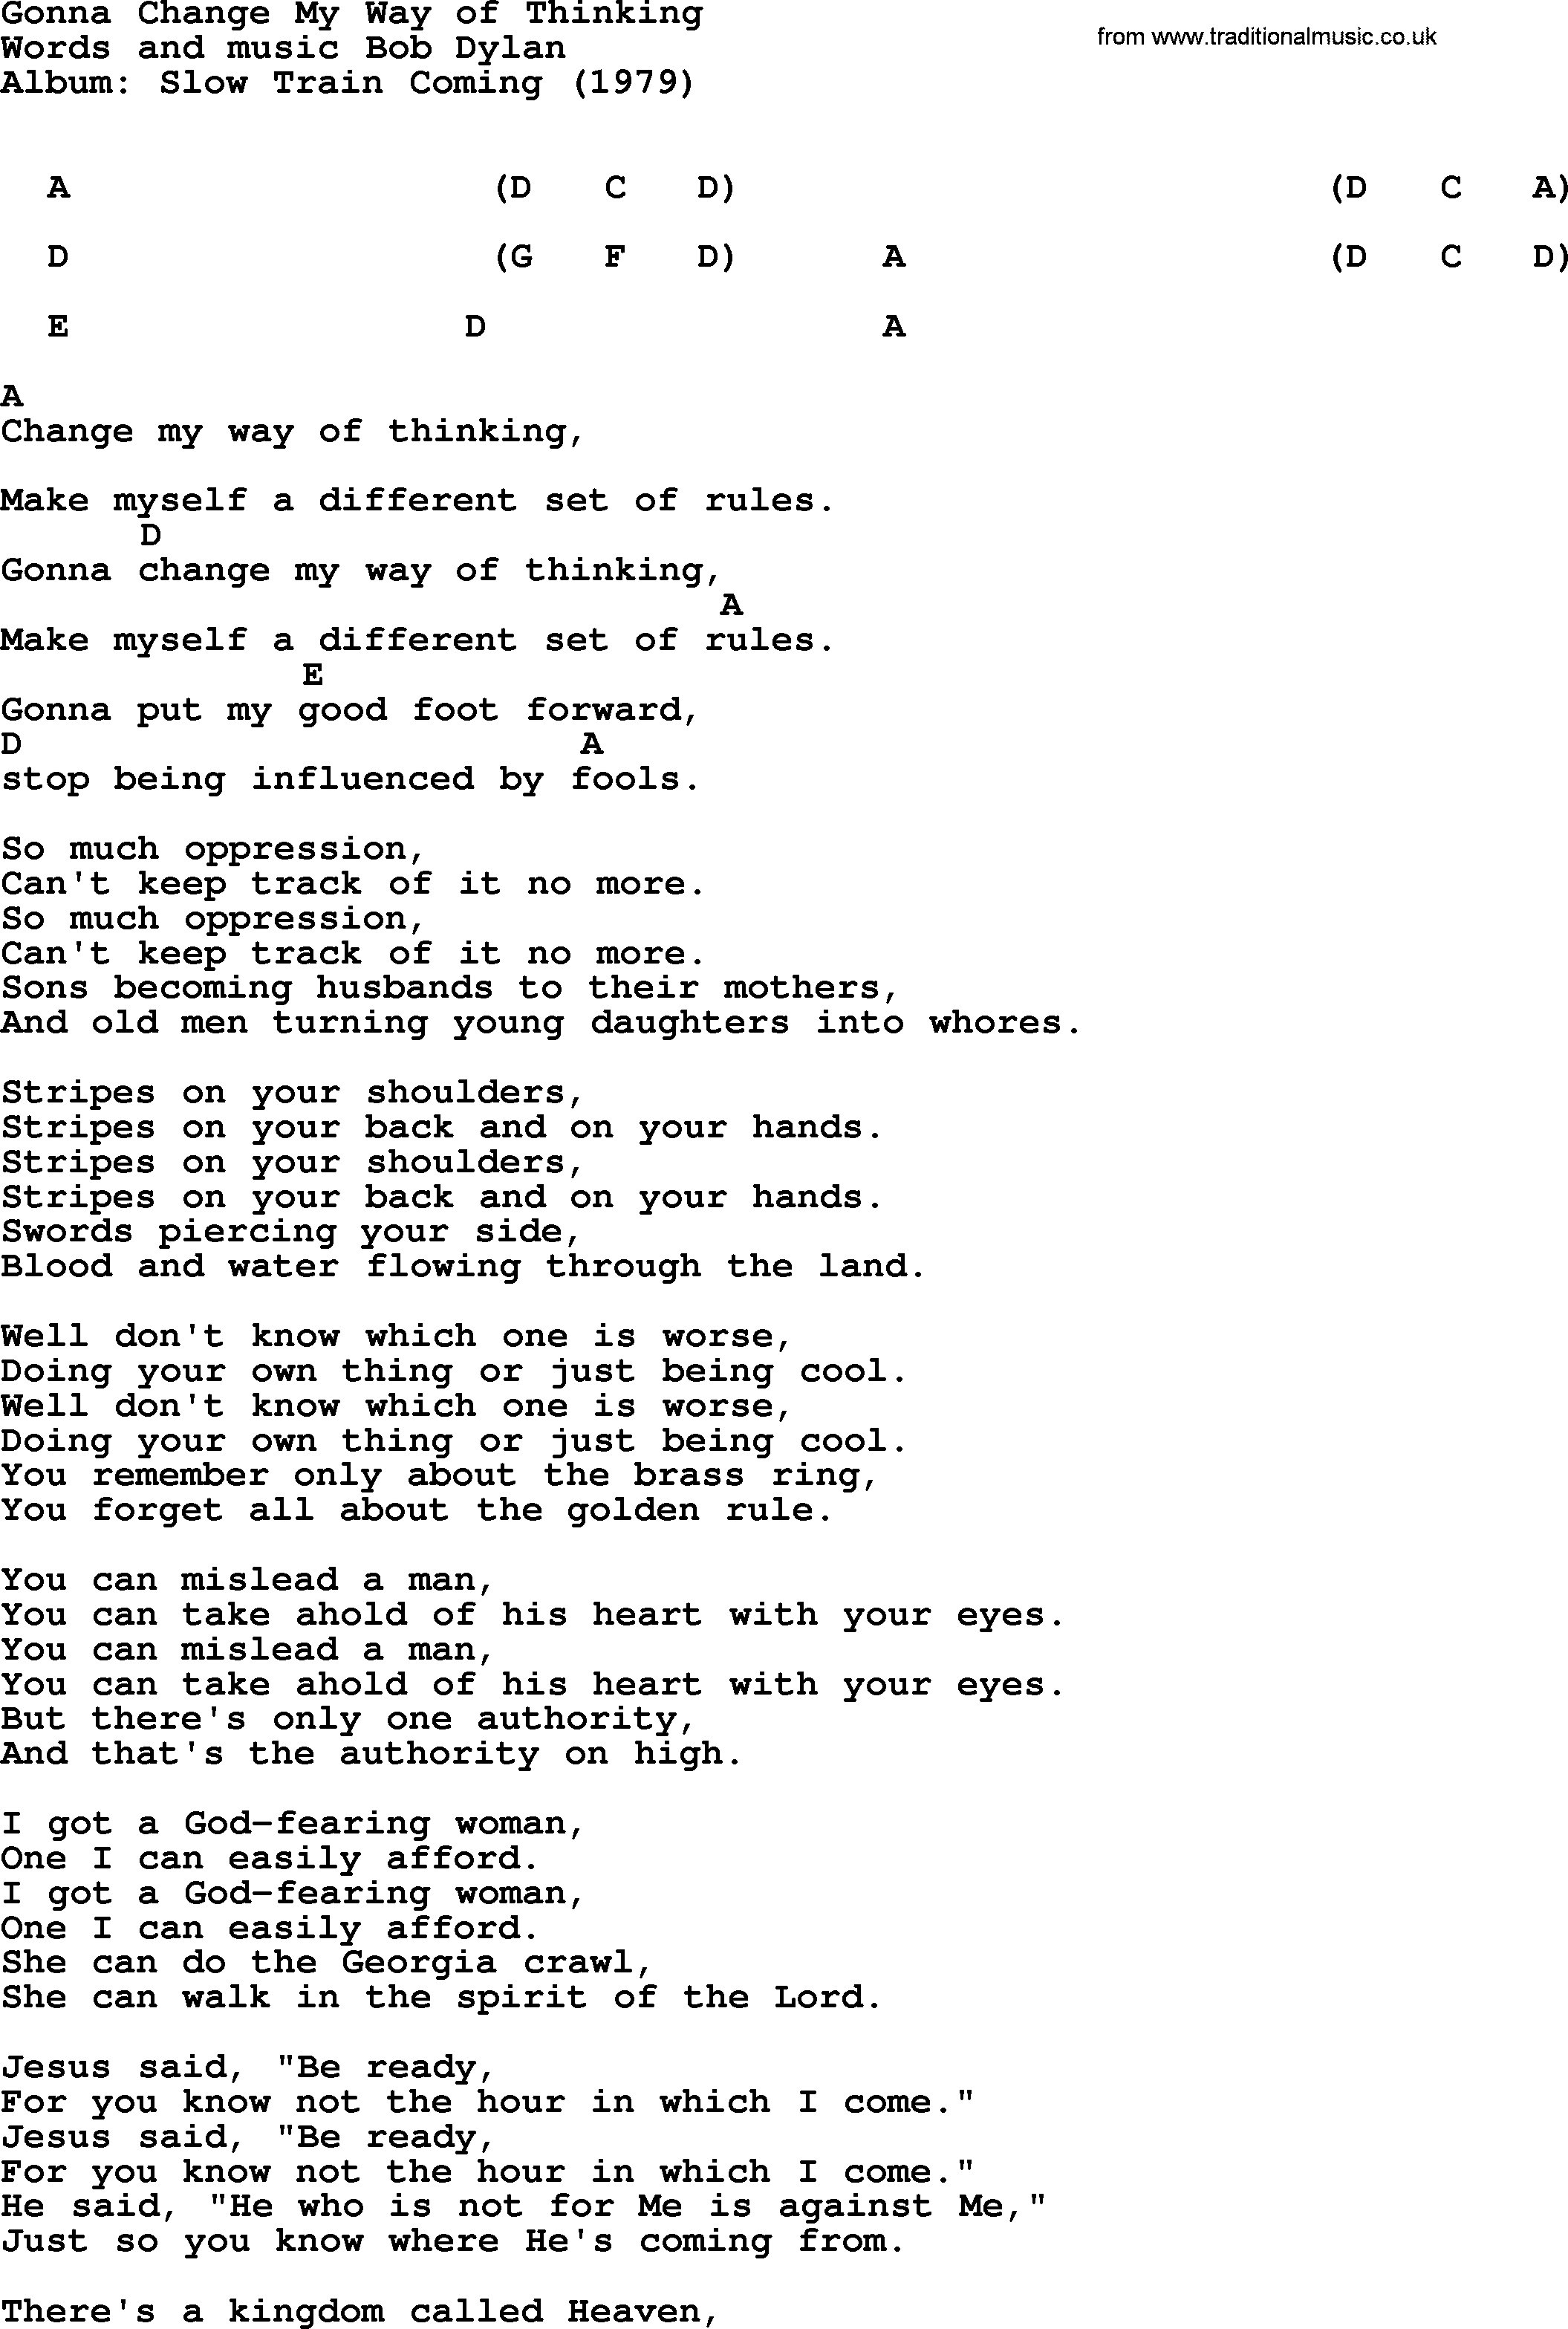 Bob Dylan song, lyrics with chords - Gonna Change My Way of Thinking